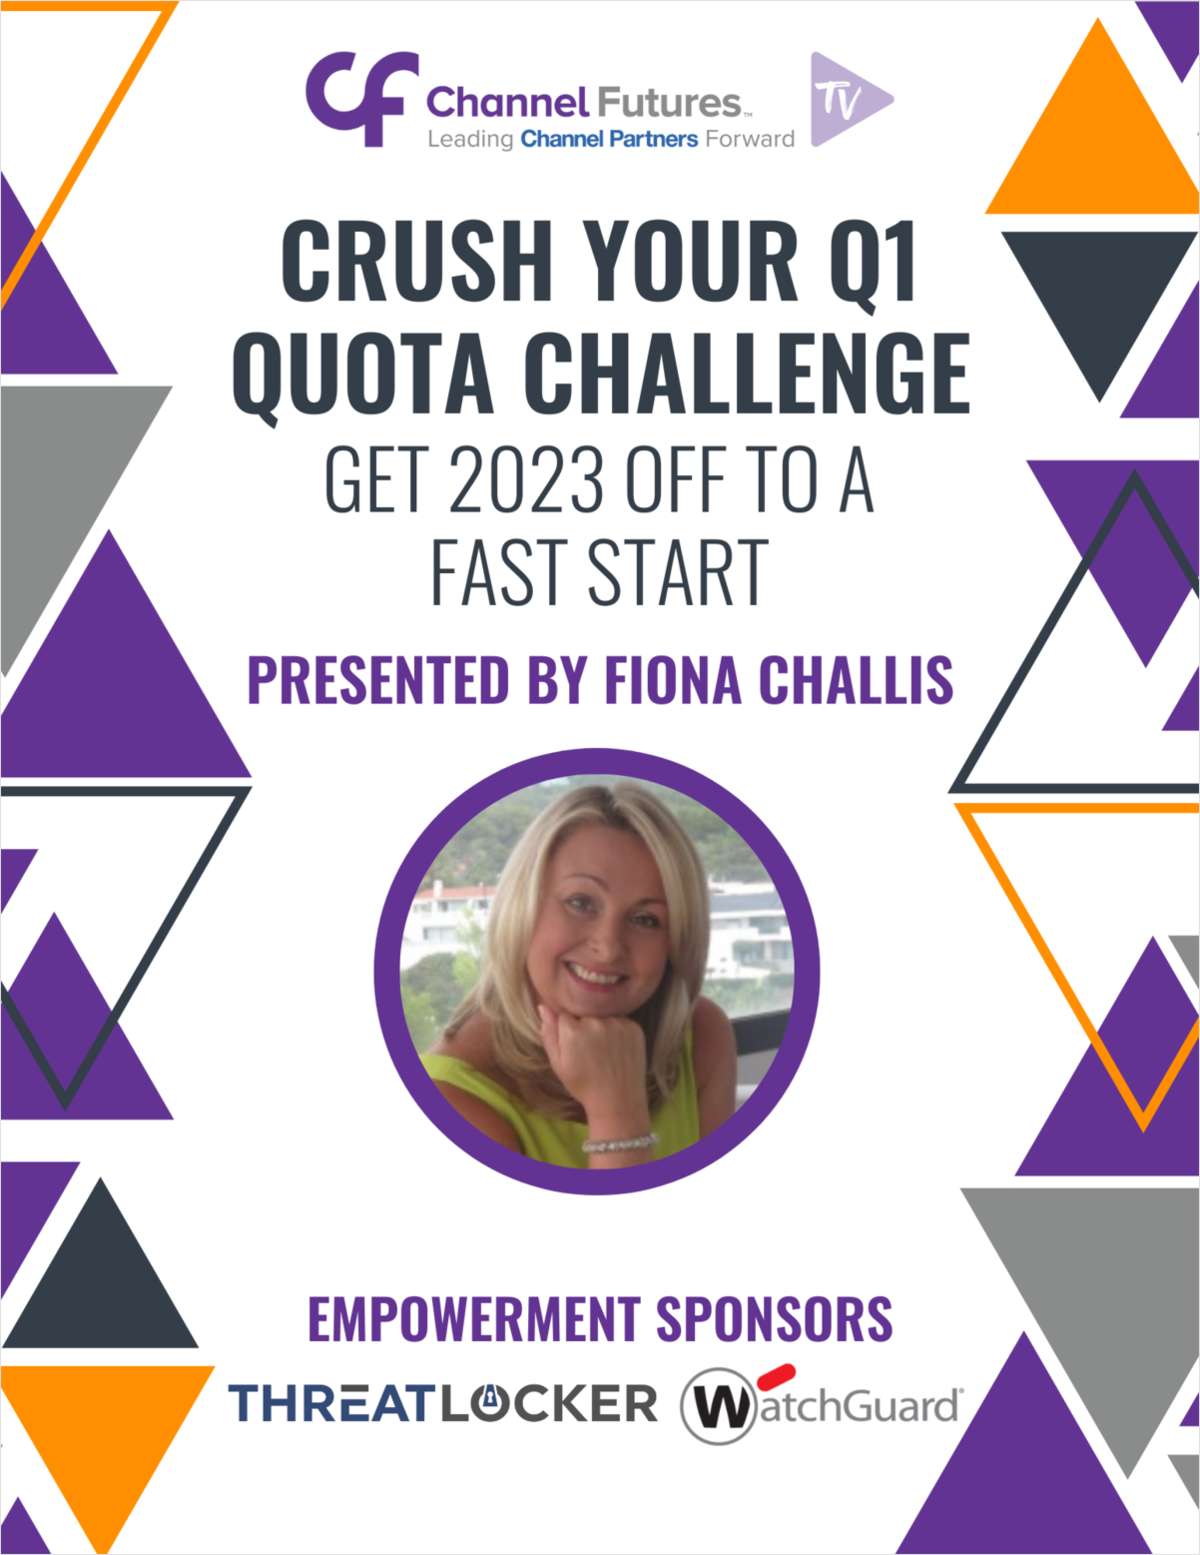 How to: Crush Your Q1 Quota Challenge - Get 2023 Off to a Fast Start